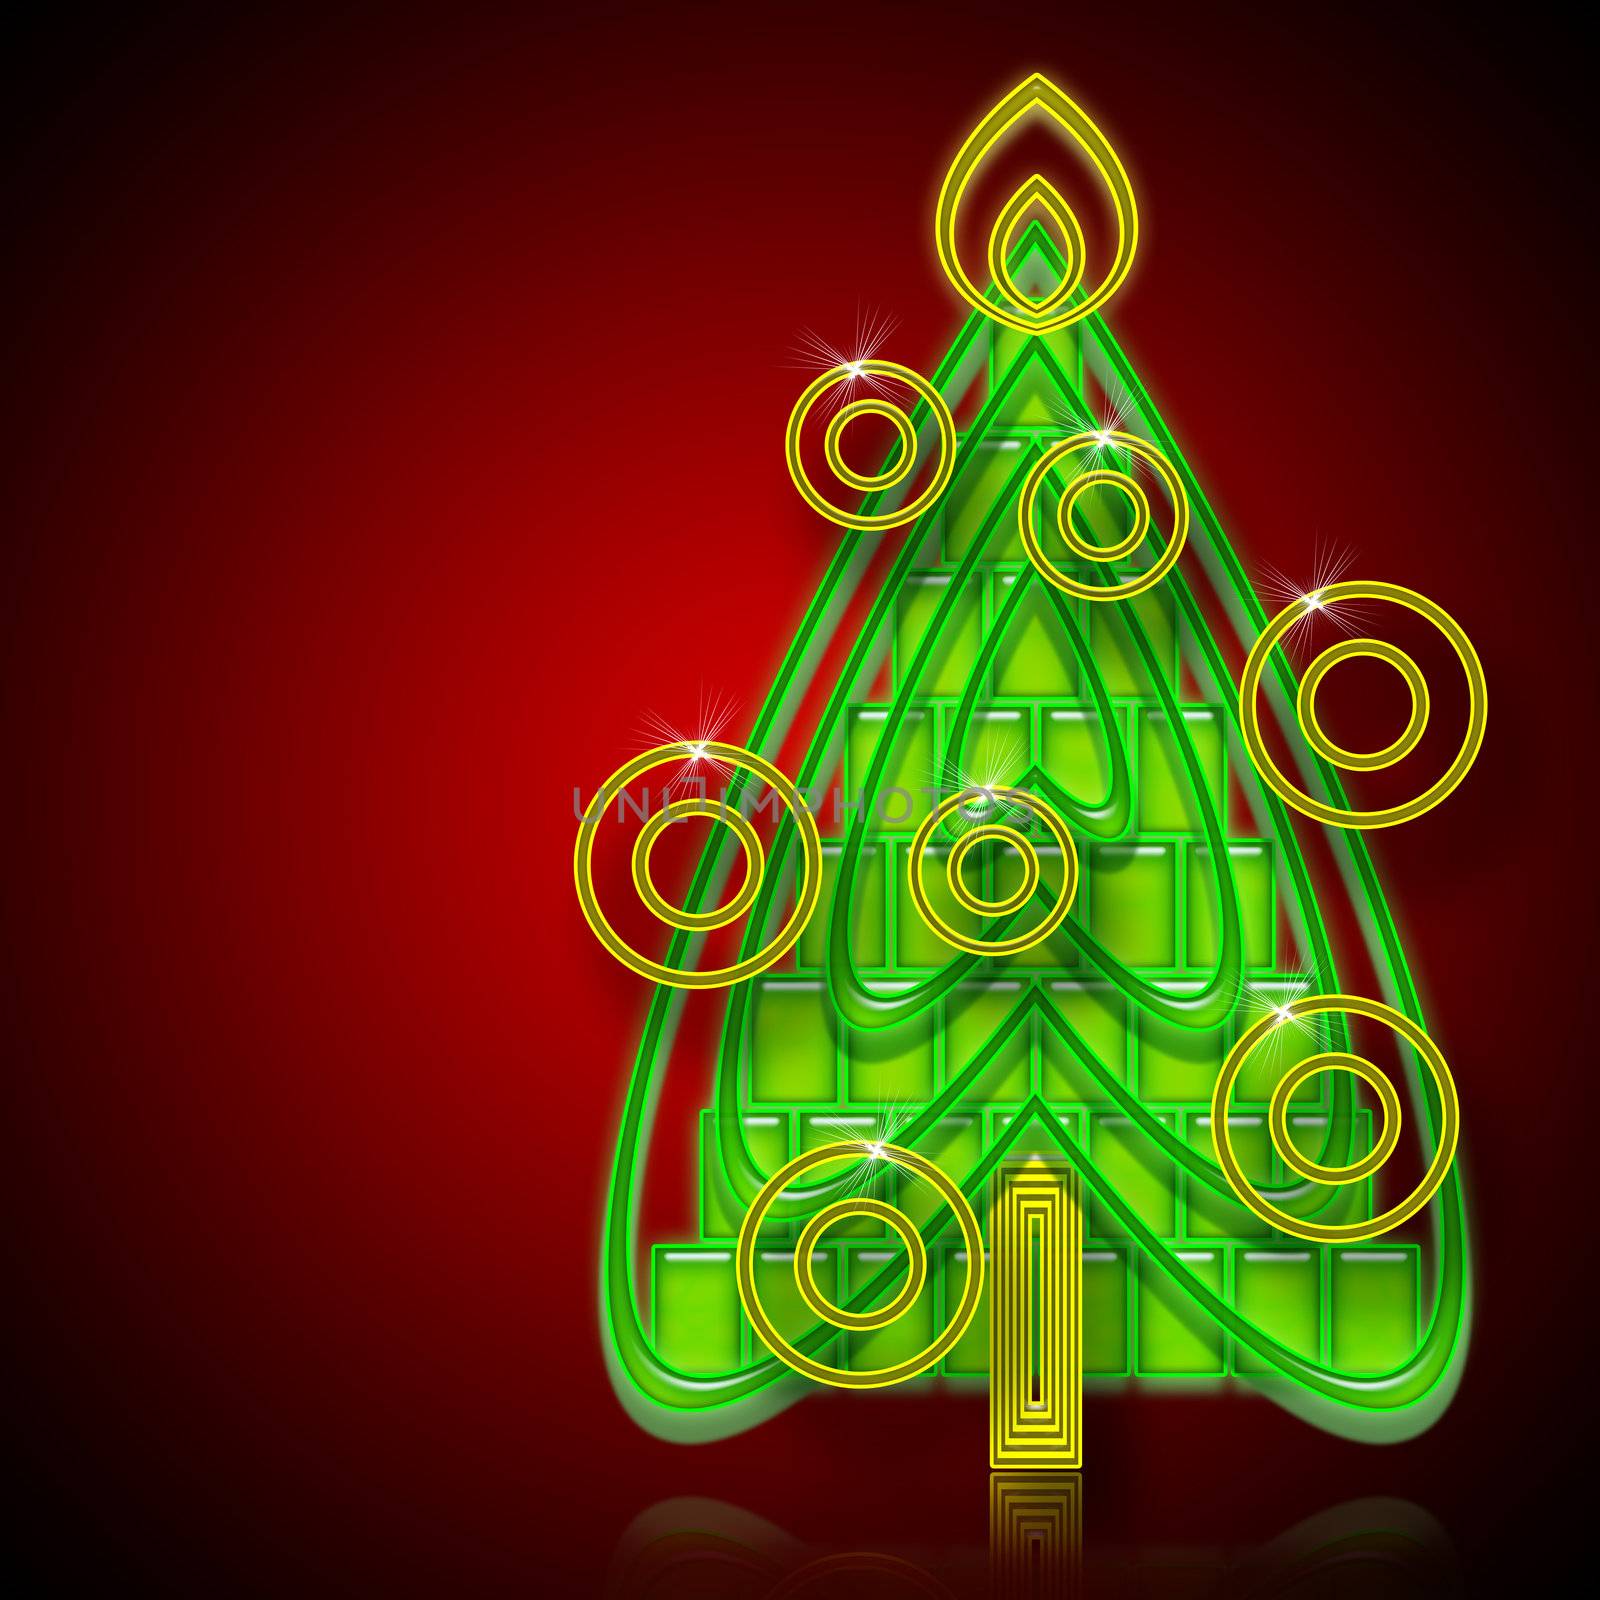 Abstract Christmas Tree illustration on red background